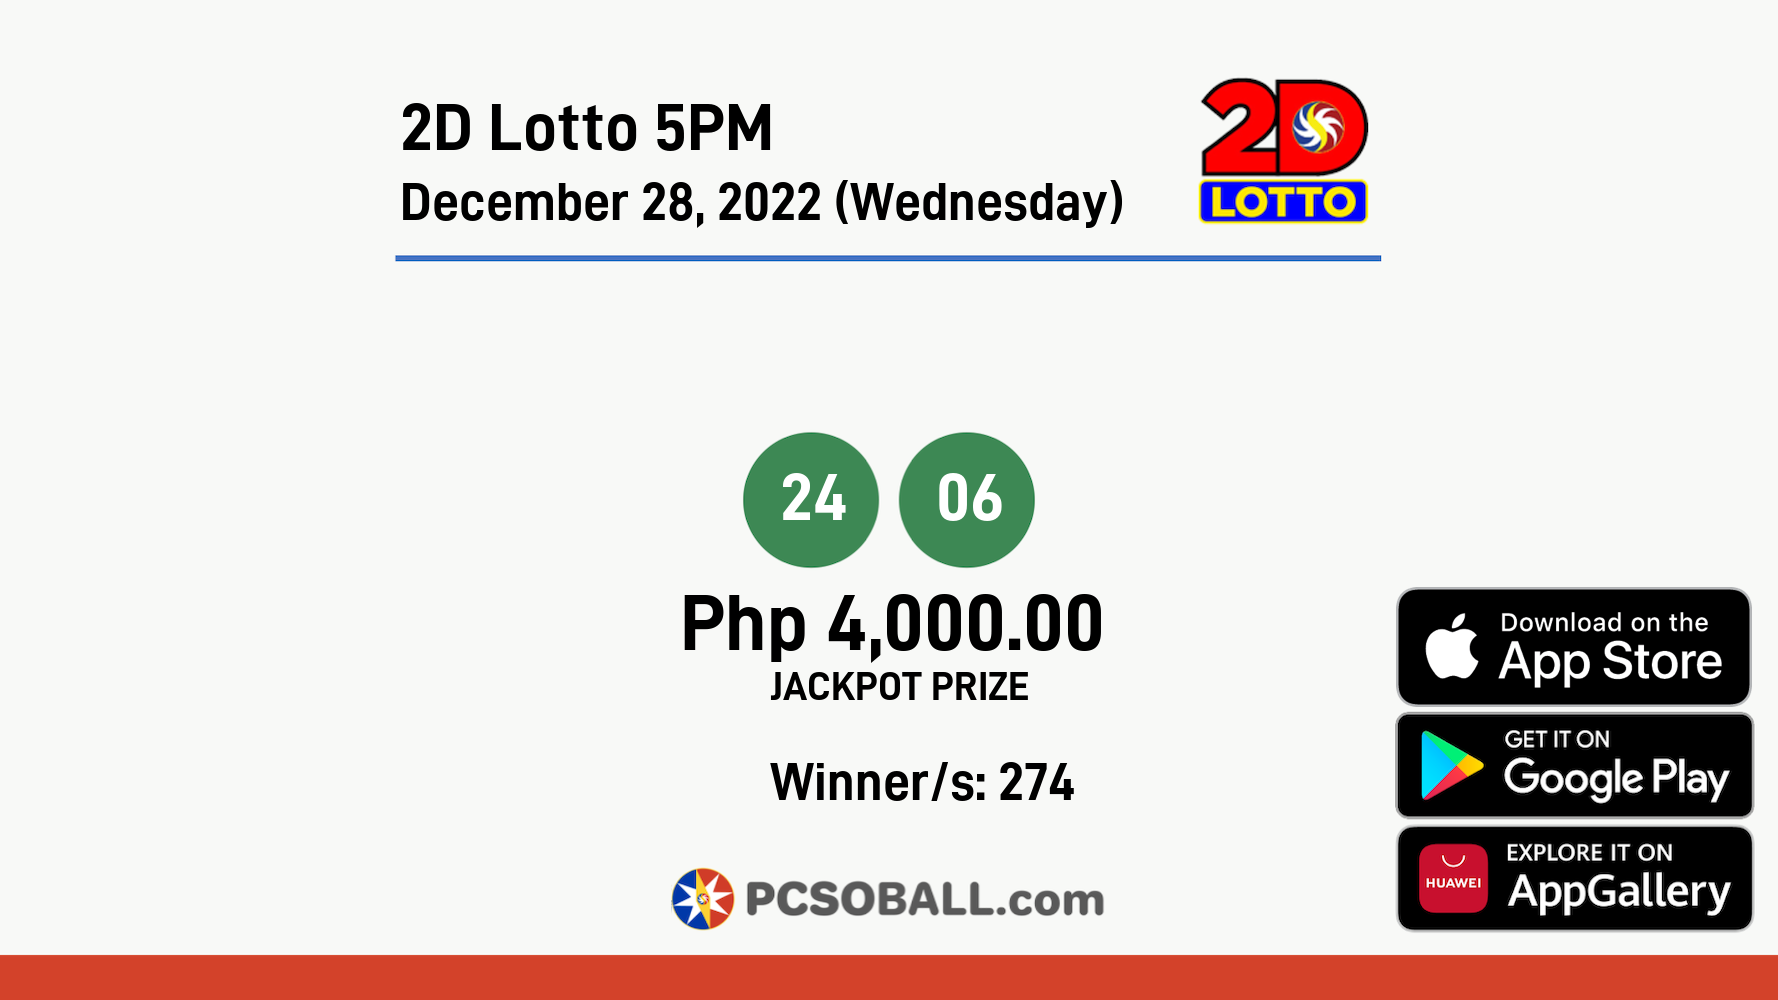 2D Lotto 5PM December 28, 2022 (Wednesday) Result